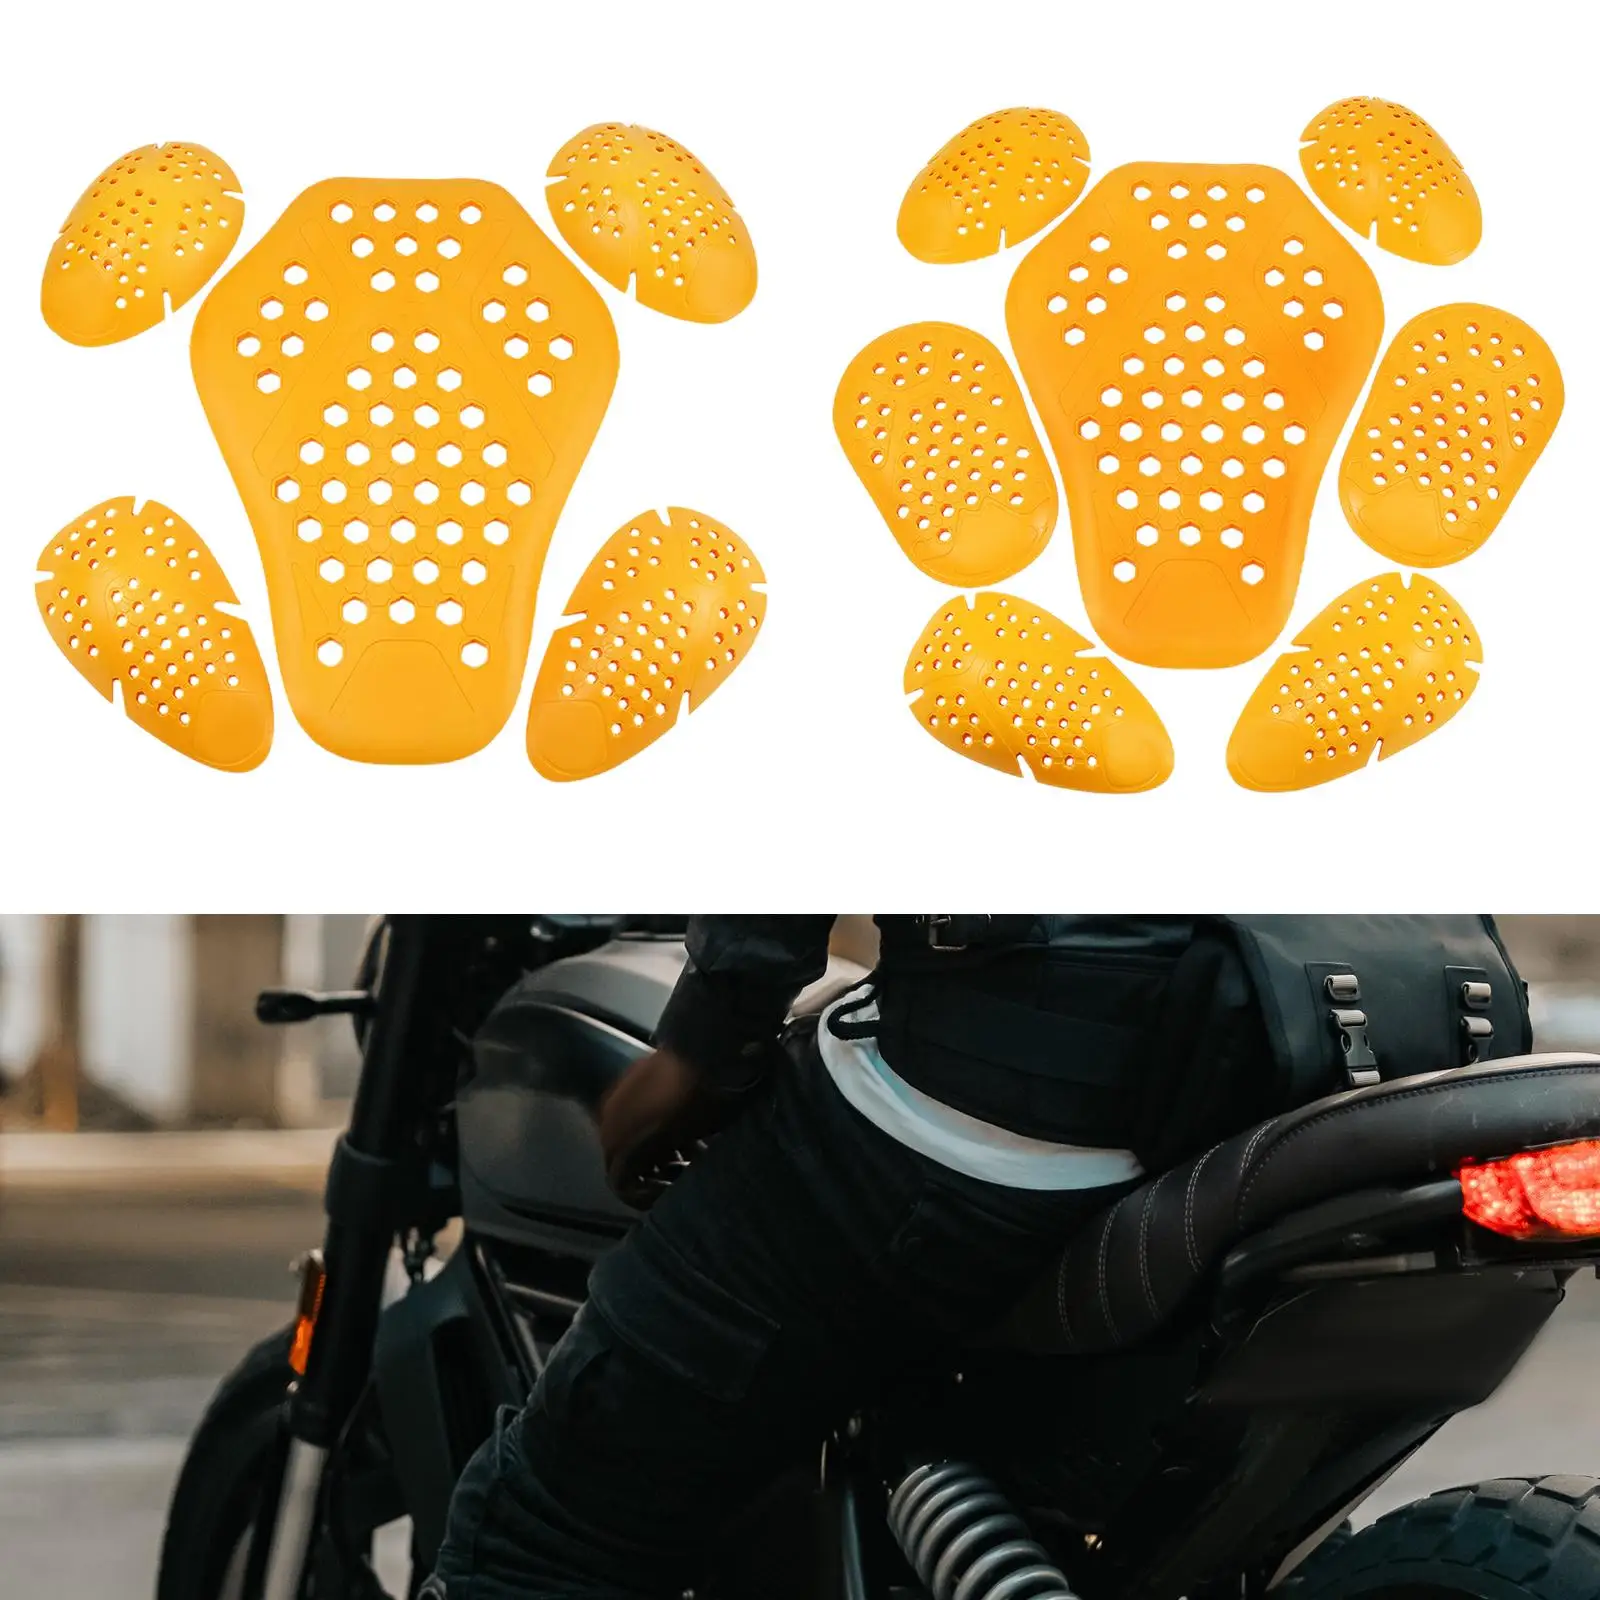 Motorcycle Jacket Armor Built in Protective Gear Armor Pad Set Moto Accessories Elbow Back Protector Jacket Insert Dorsal